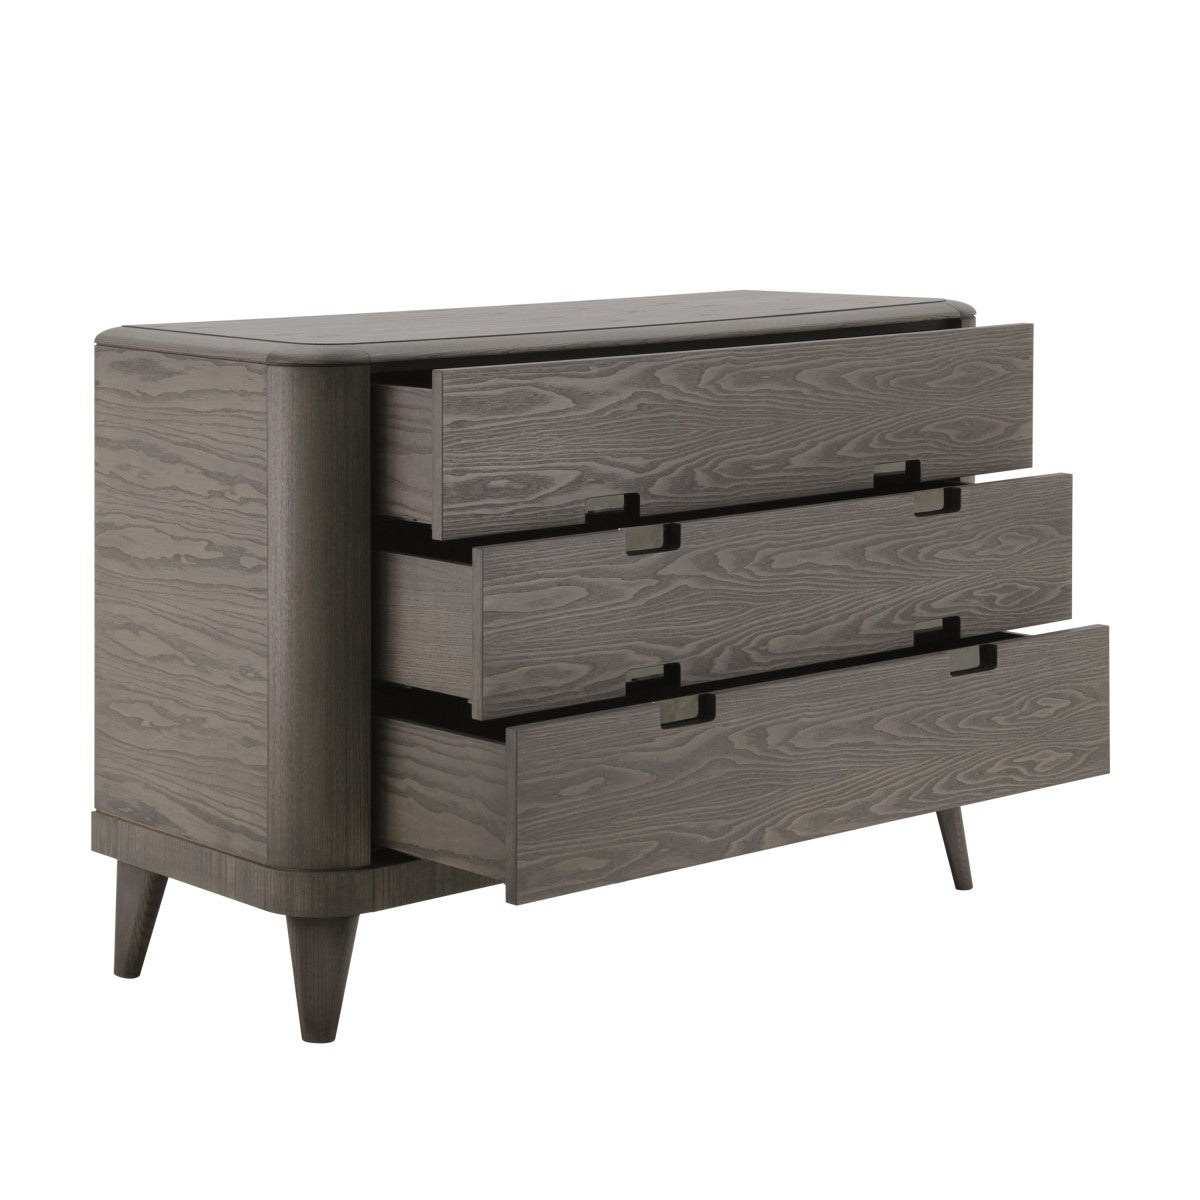 Ada Chest Of Drawers-Seven Sedie-Contract Furniture Store